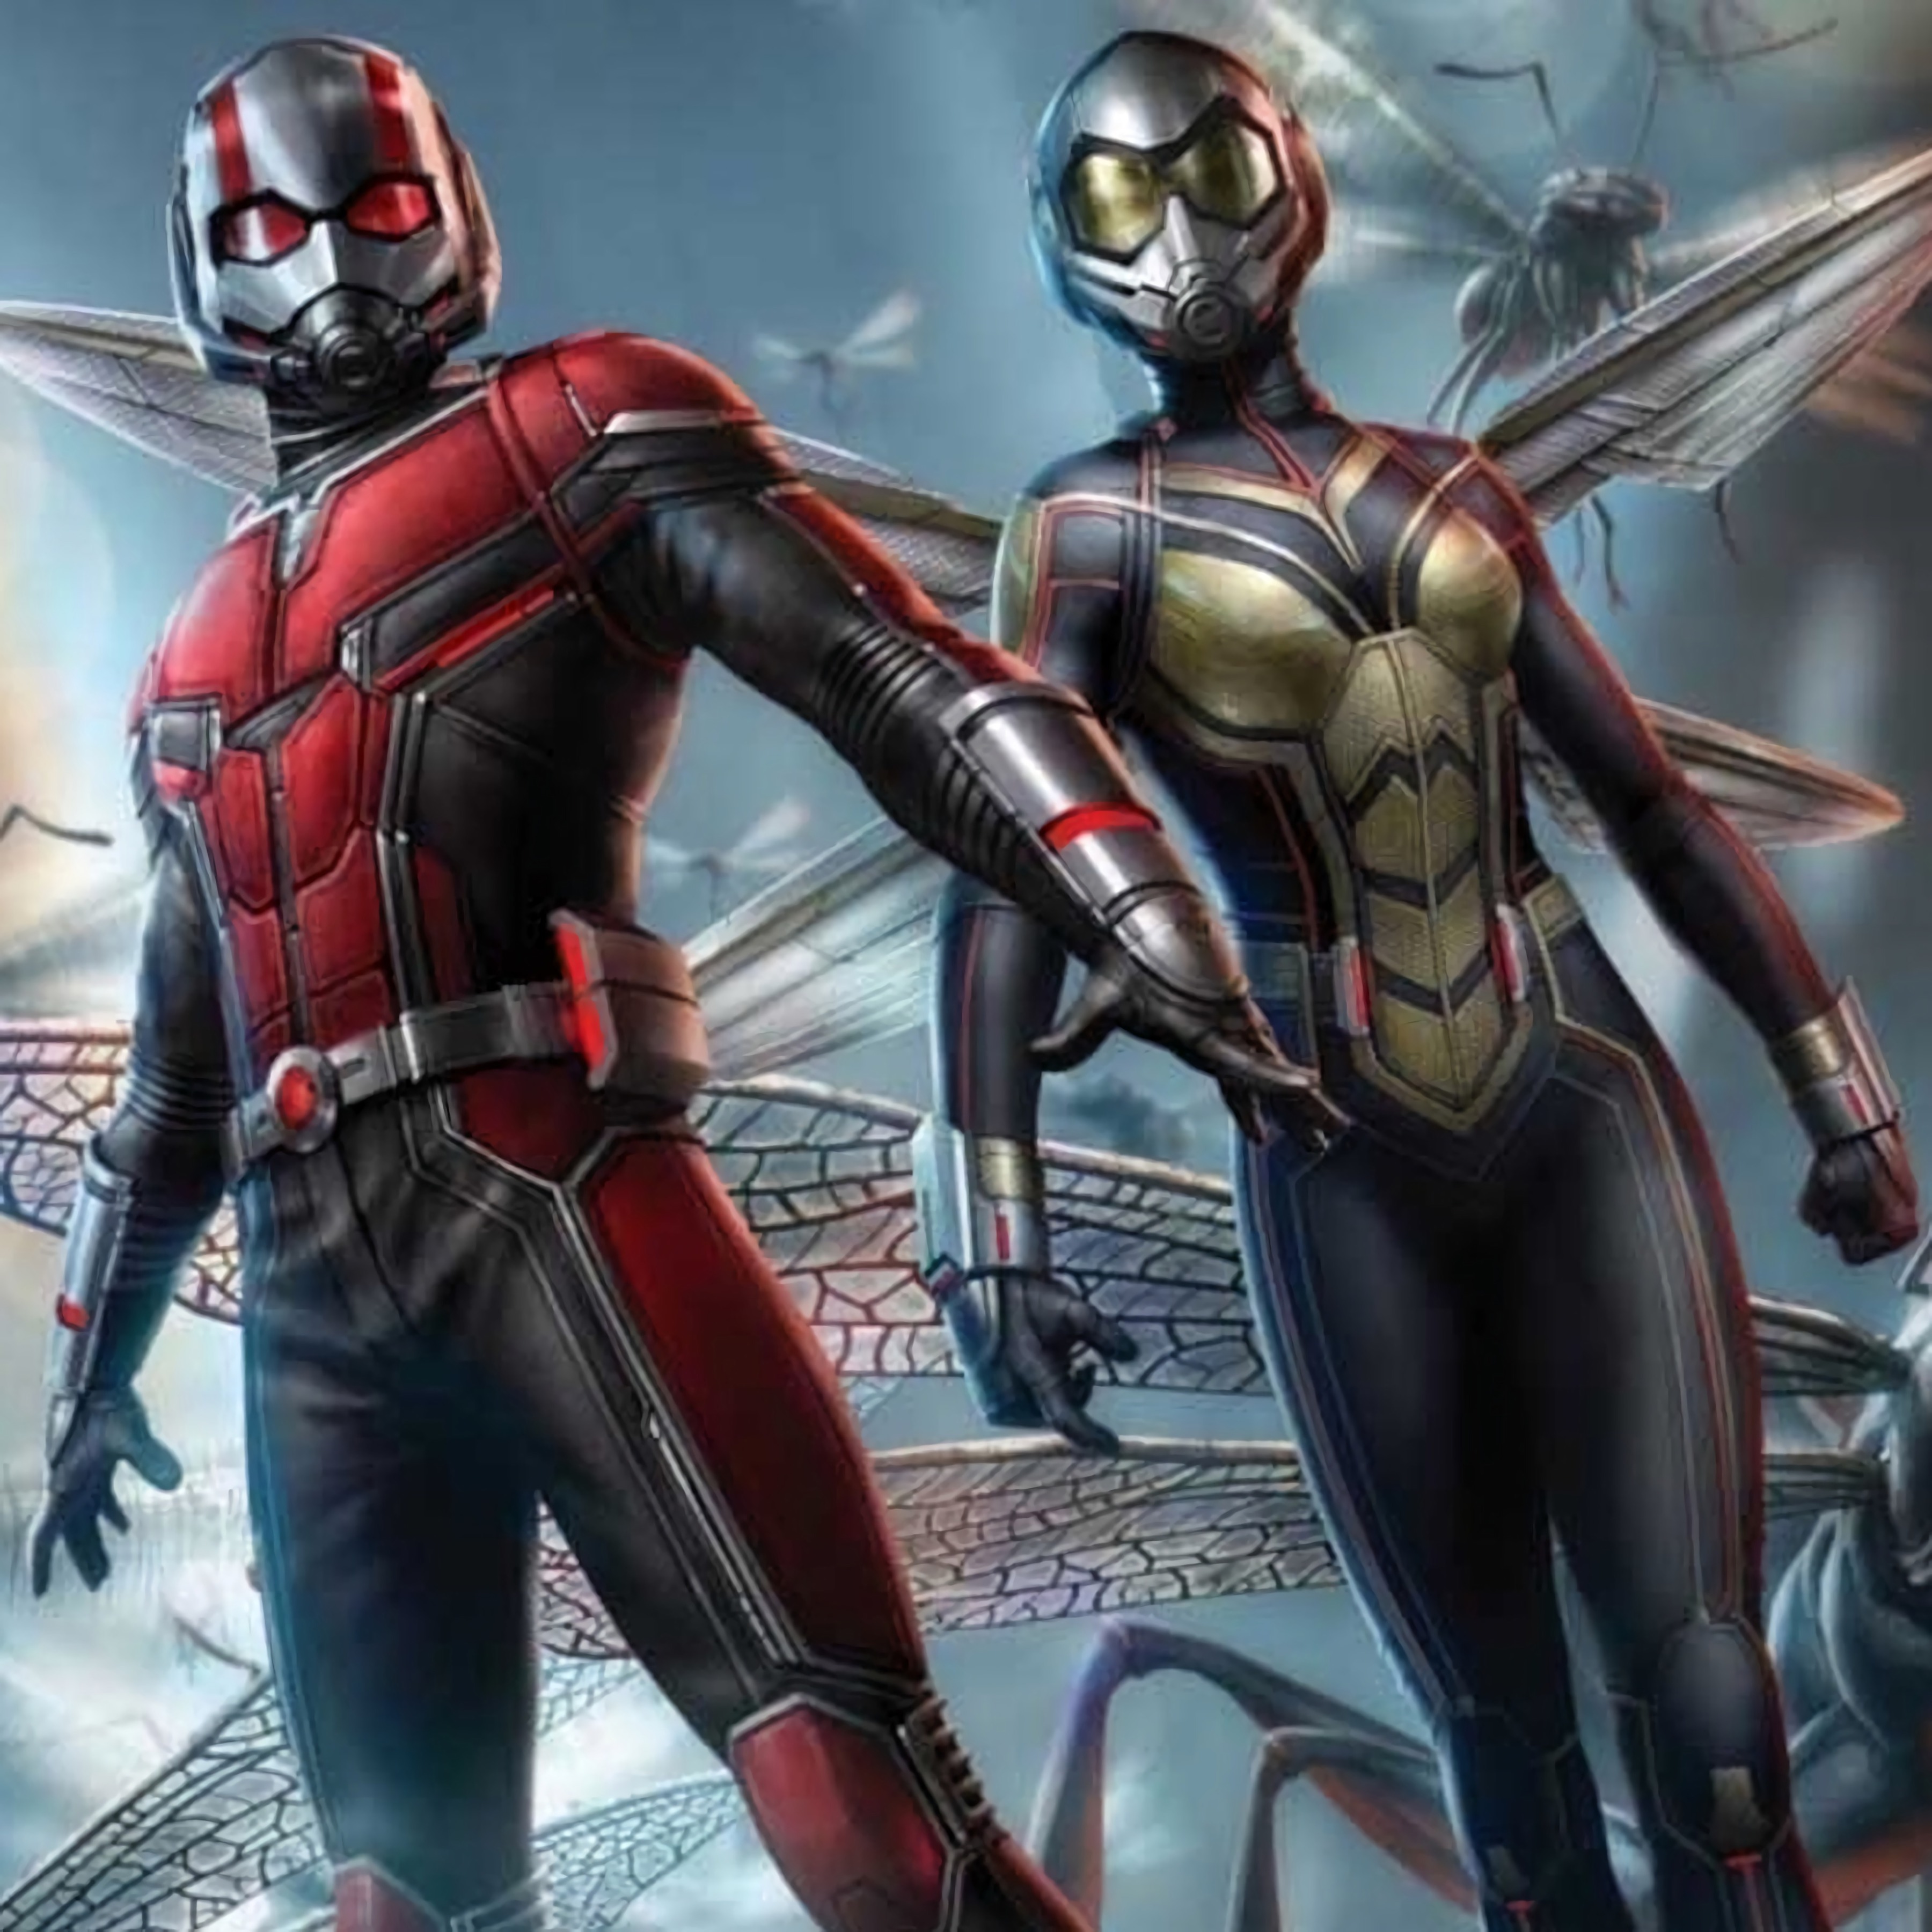 Ant-Man and The Wasp Robot Rumble